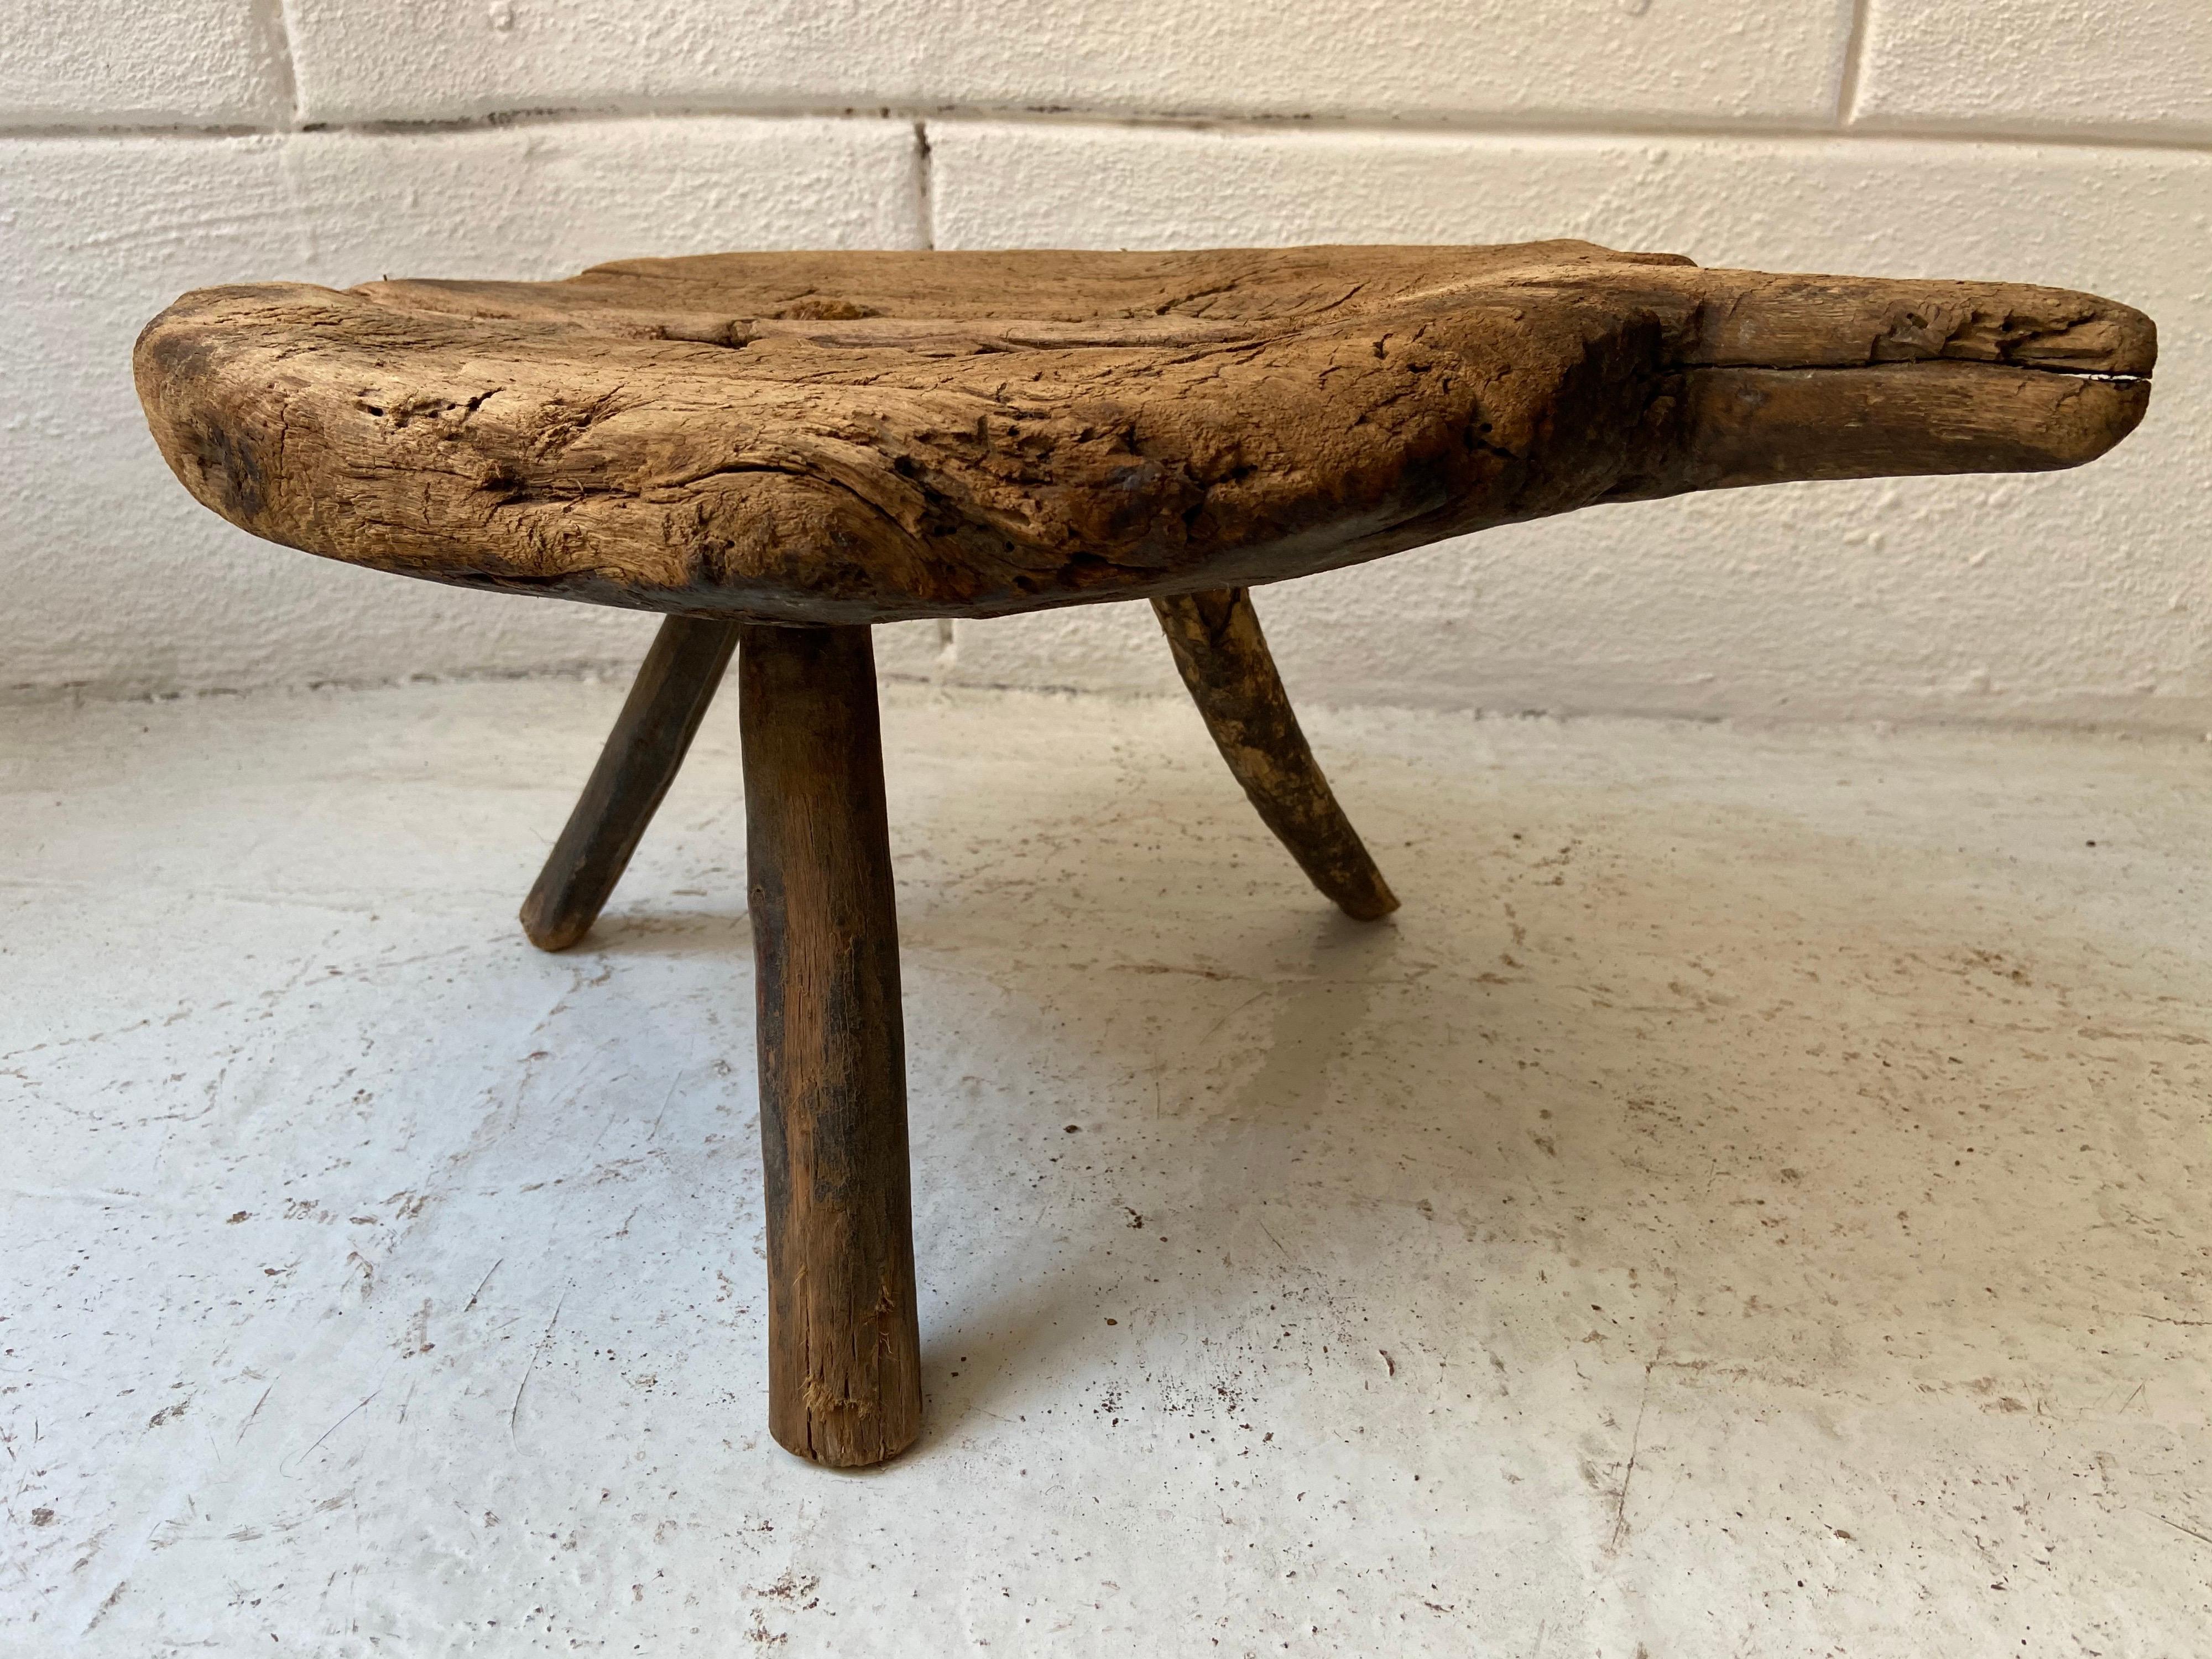 1920s cedar tripod work stool from Tamazunchale, San Luis Potosi, Mexico. Heavily weathered patina and wood grain. All legs are original and structurally solid.